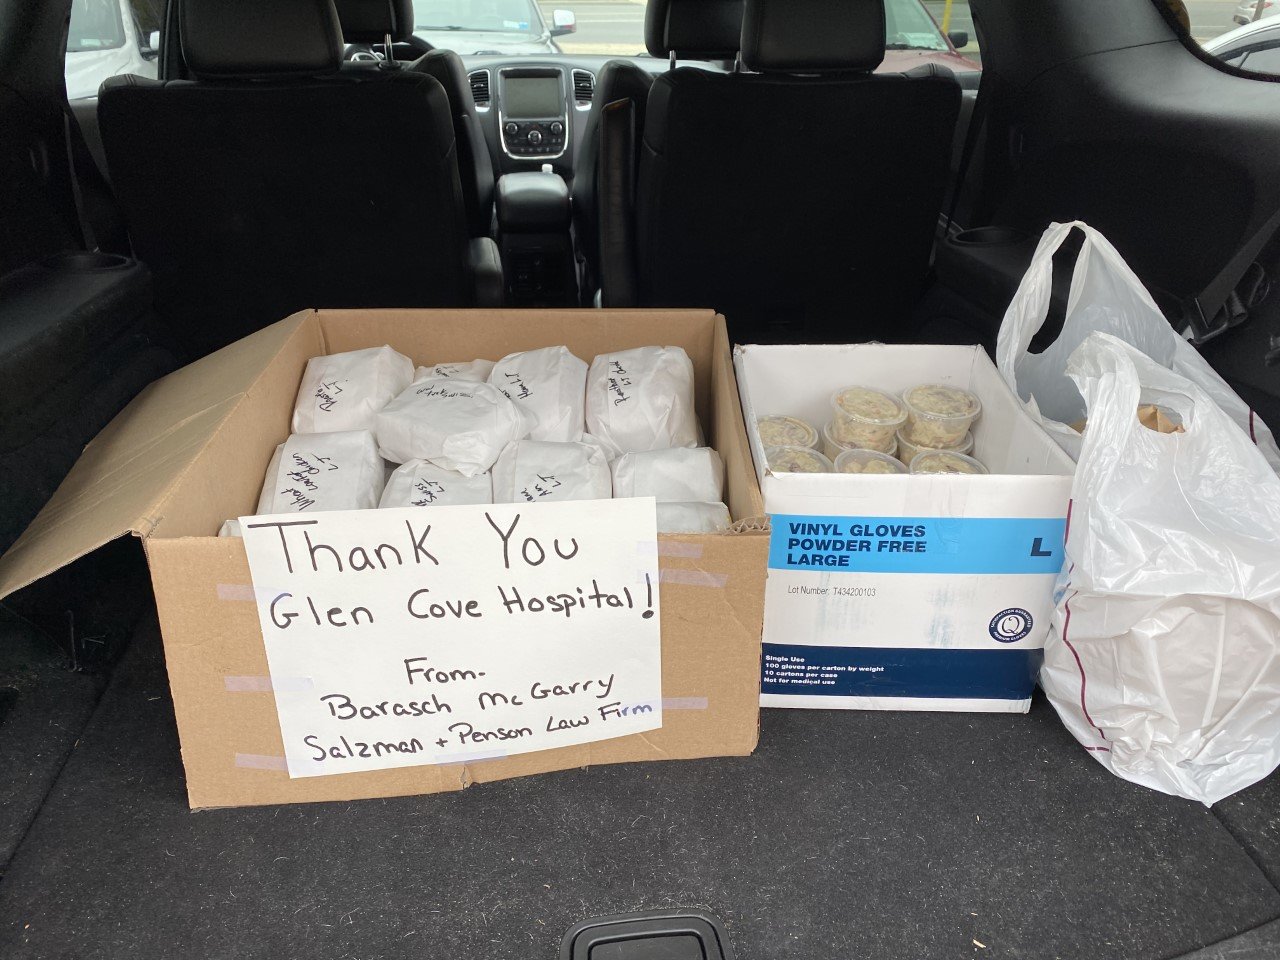 Lunches were donated by the Barasch McGarry Law Firm to Glen Cove Hospital on April 26.